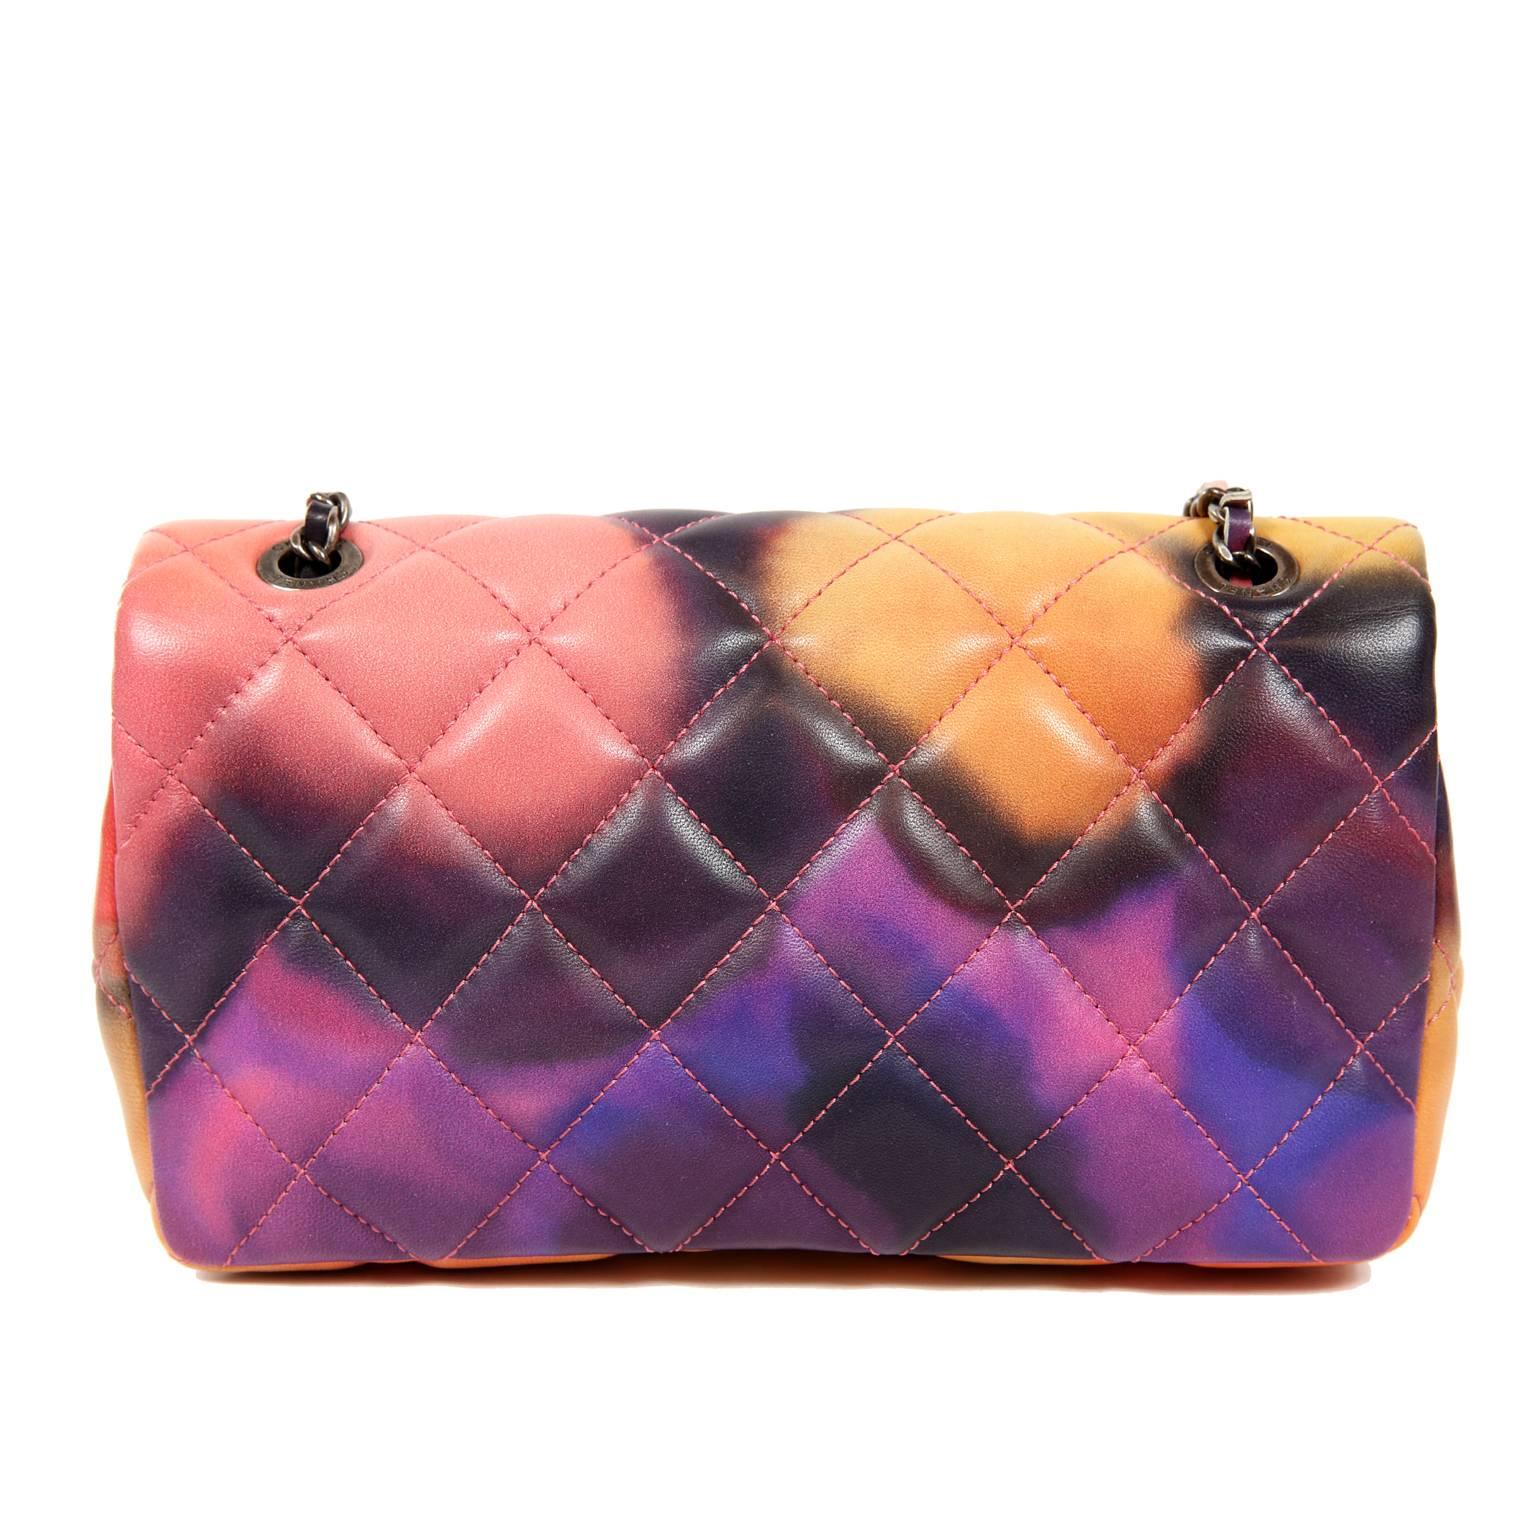 Chanel Printed Watercolor Mini Classic Flap- PRISTINE; Never Carried Special Edition from the Spring 2015 Collection
Bright and beautiful, this artistic rendition of the classic is a must have for any collector. 
Shades of pink, orange, yellow and